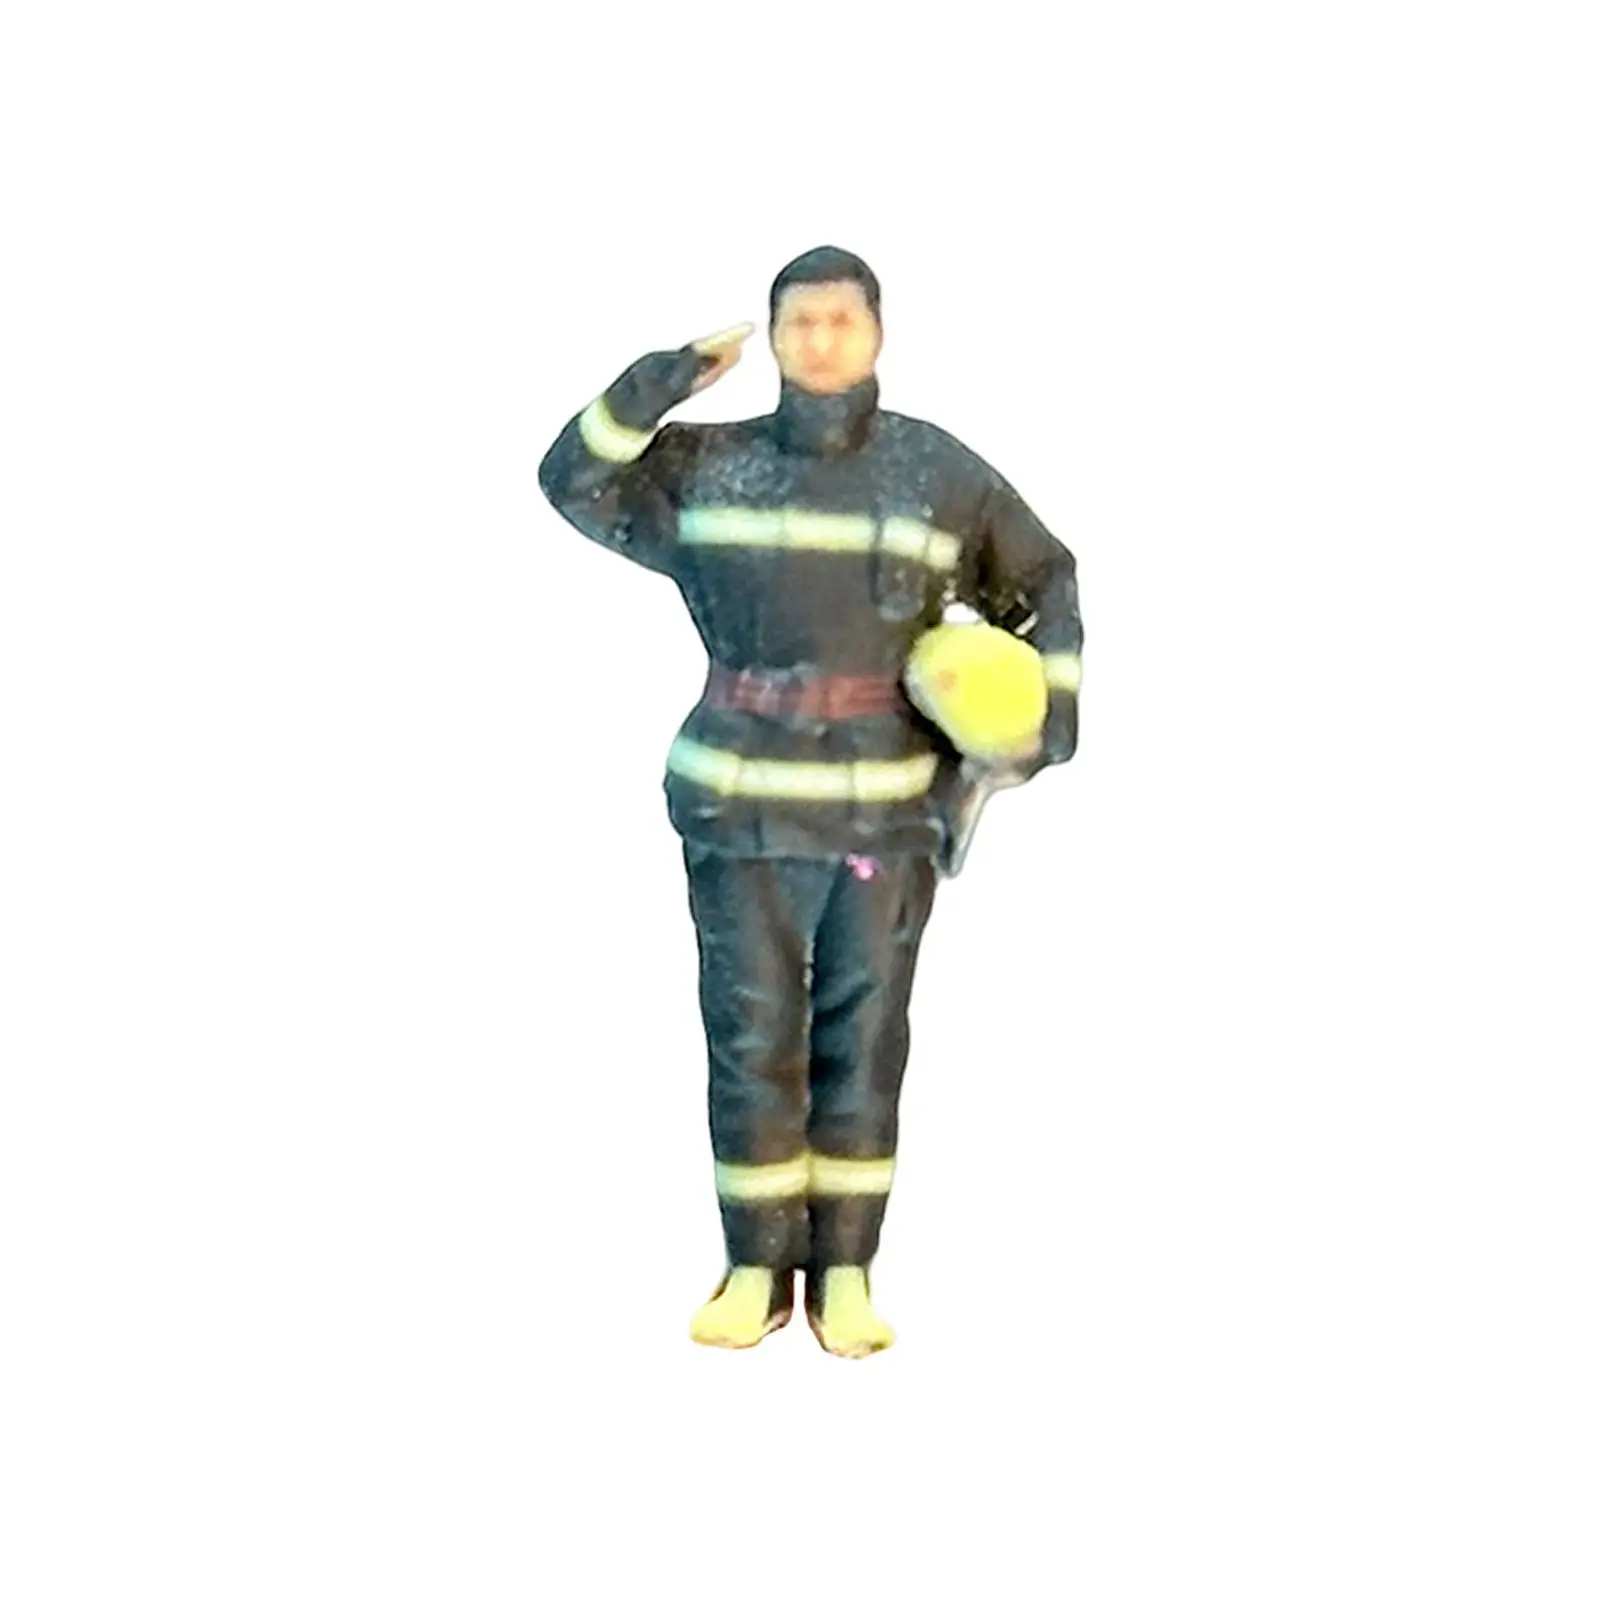 Miniature 1:64 Firefighter Figures Diorama Action Figures for Micro Landscapes Diorama Photography Props Building Accessories